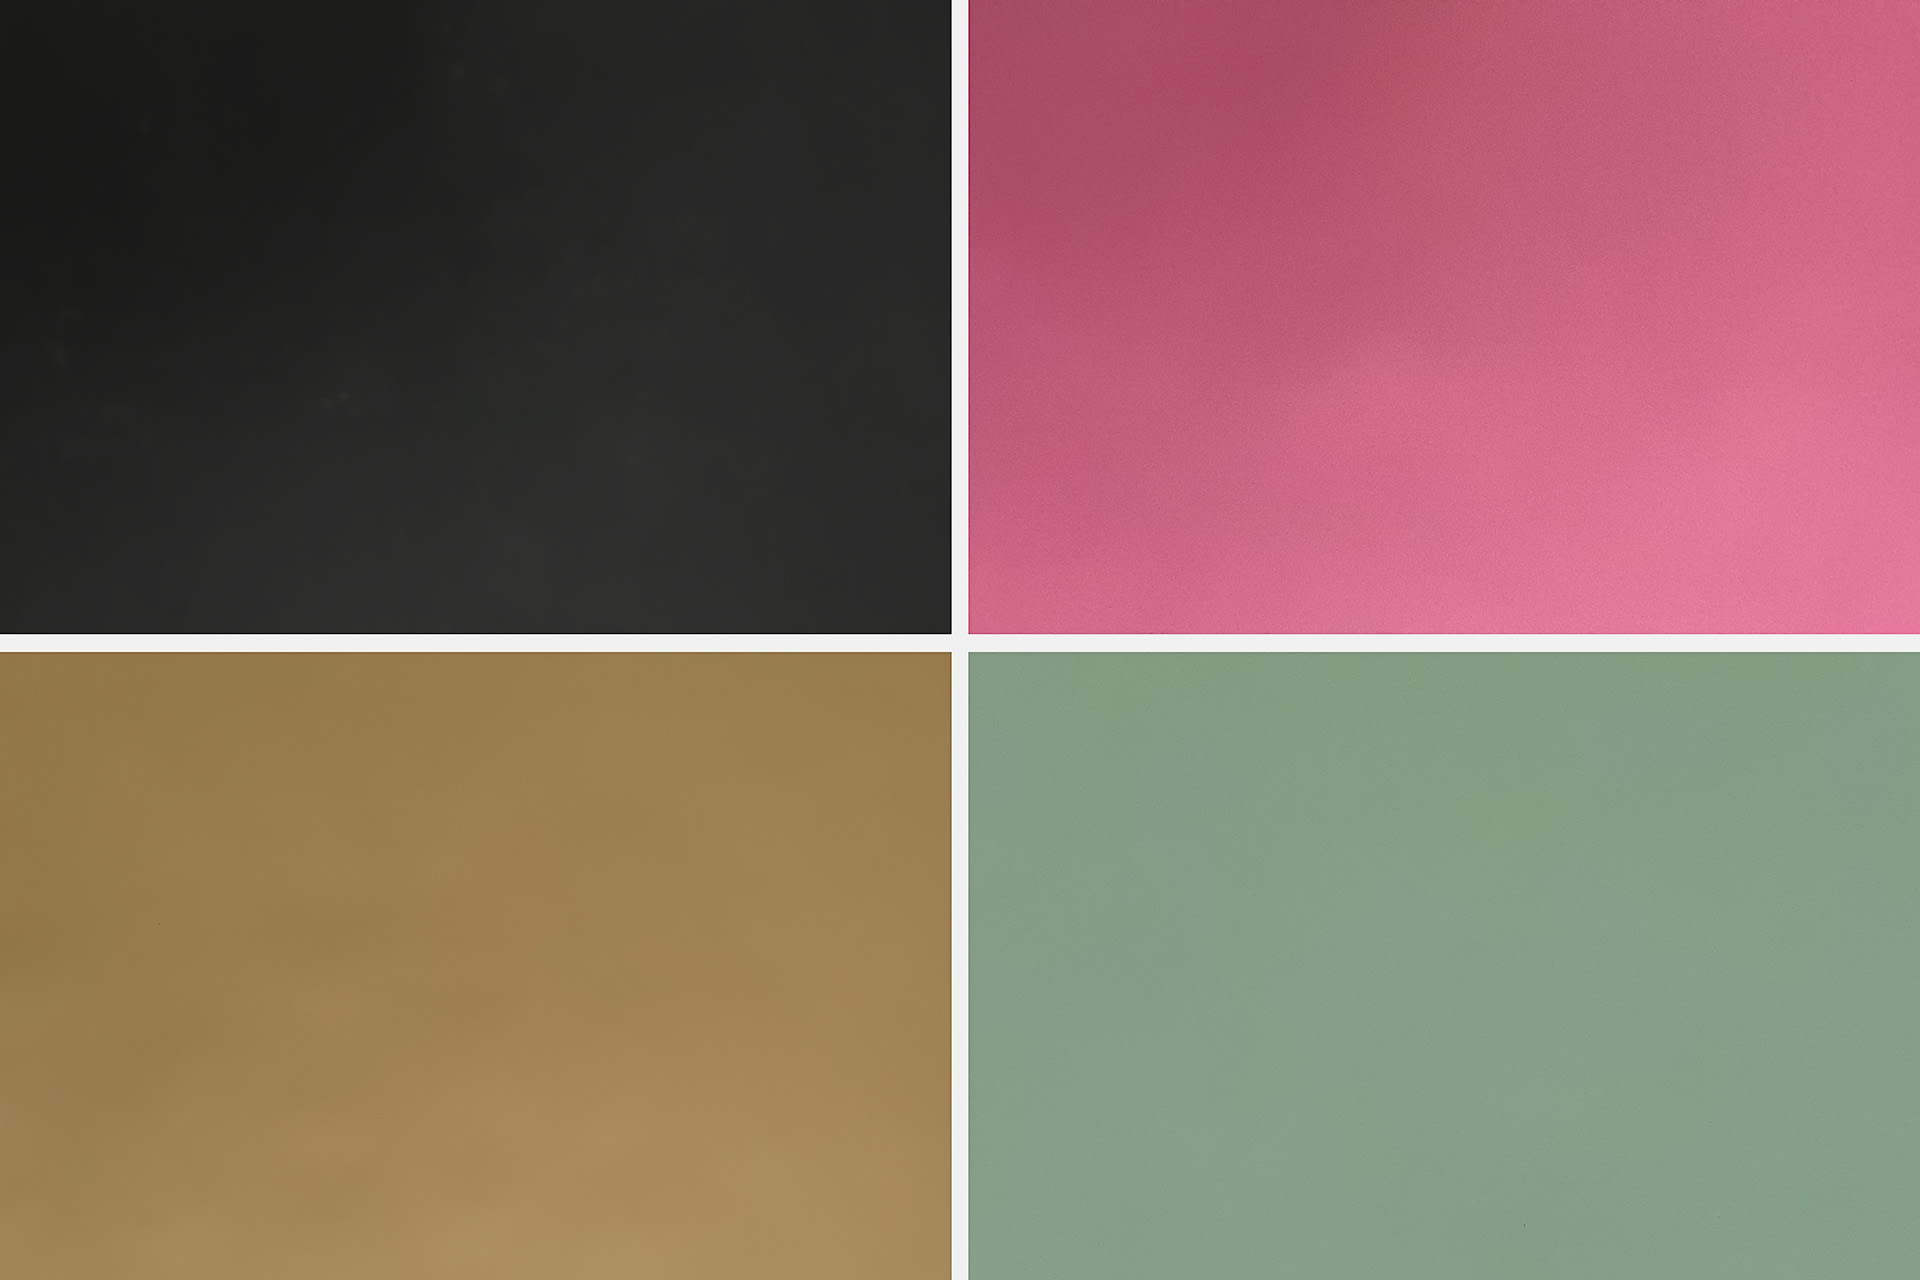 Paper backgrounds. NB! There are no paper backgrounds during the Christmas season